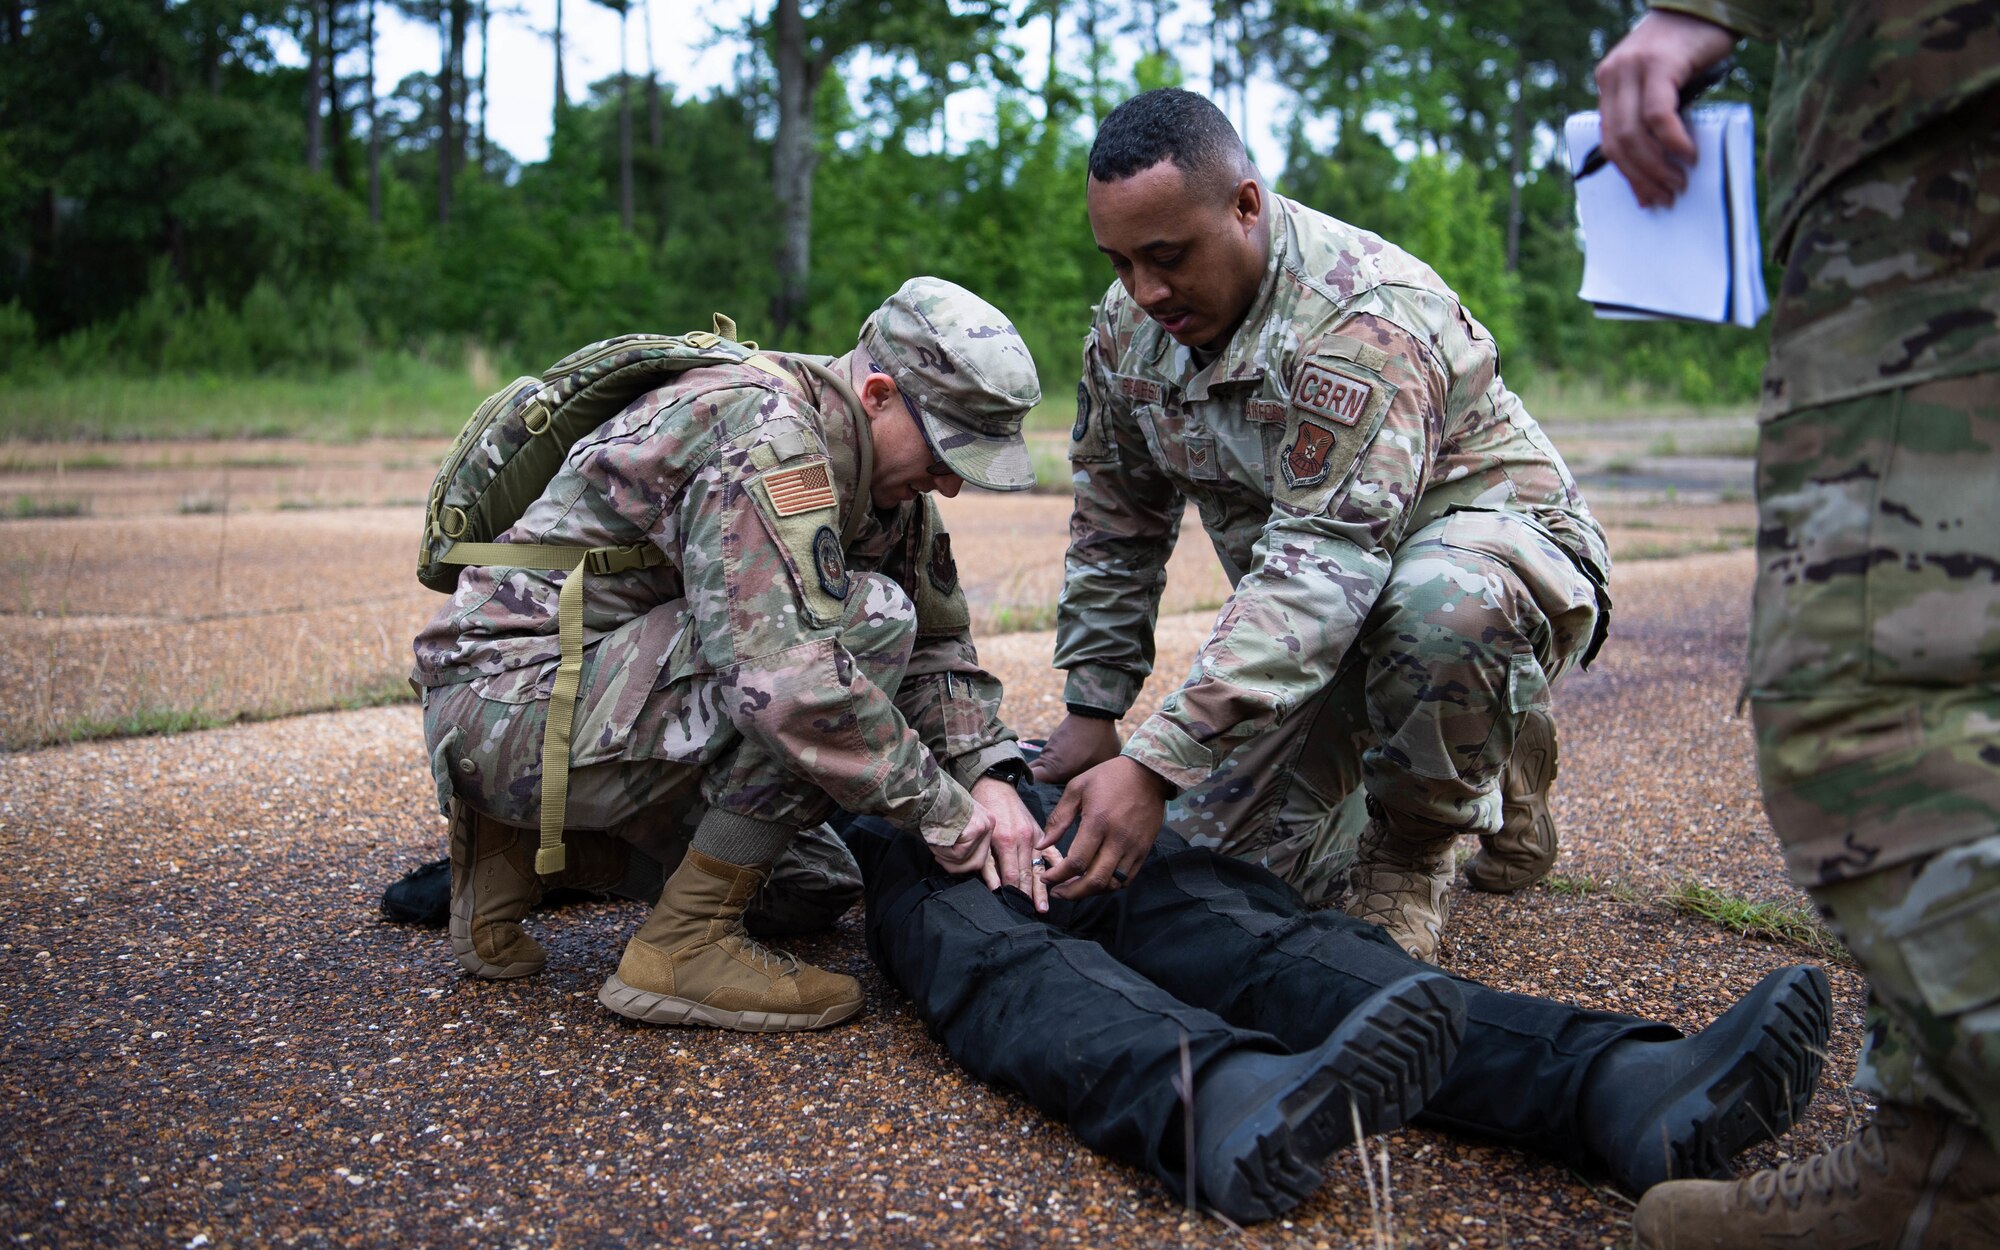 Master Sgt. Richard McGinnis. 2nd Civil Engineer Squadron commander's support staff superintendent, and Staff Sgt. Roderick R. Pearson Jr., 2nd CES emergency management plans noncommissioned officer in charge, place a tourniquet on a dummy during a 2nd CES training exercise at Barksdale Air Force Base, Louisiana, May 20, 2021. The exercise combined various contingency skills the engineers may face in a deployed environment. (U.S. Air Force photo by Senior Airman Jacob B. Wrightsman)